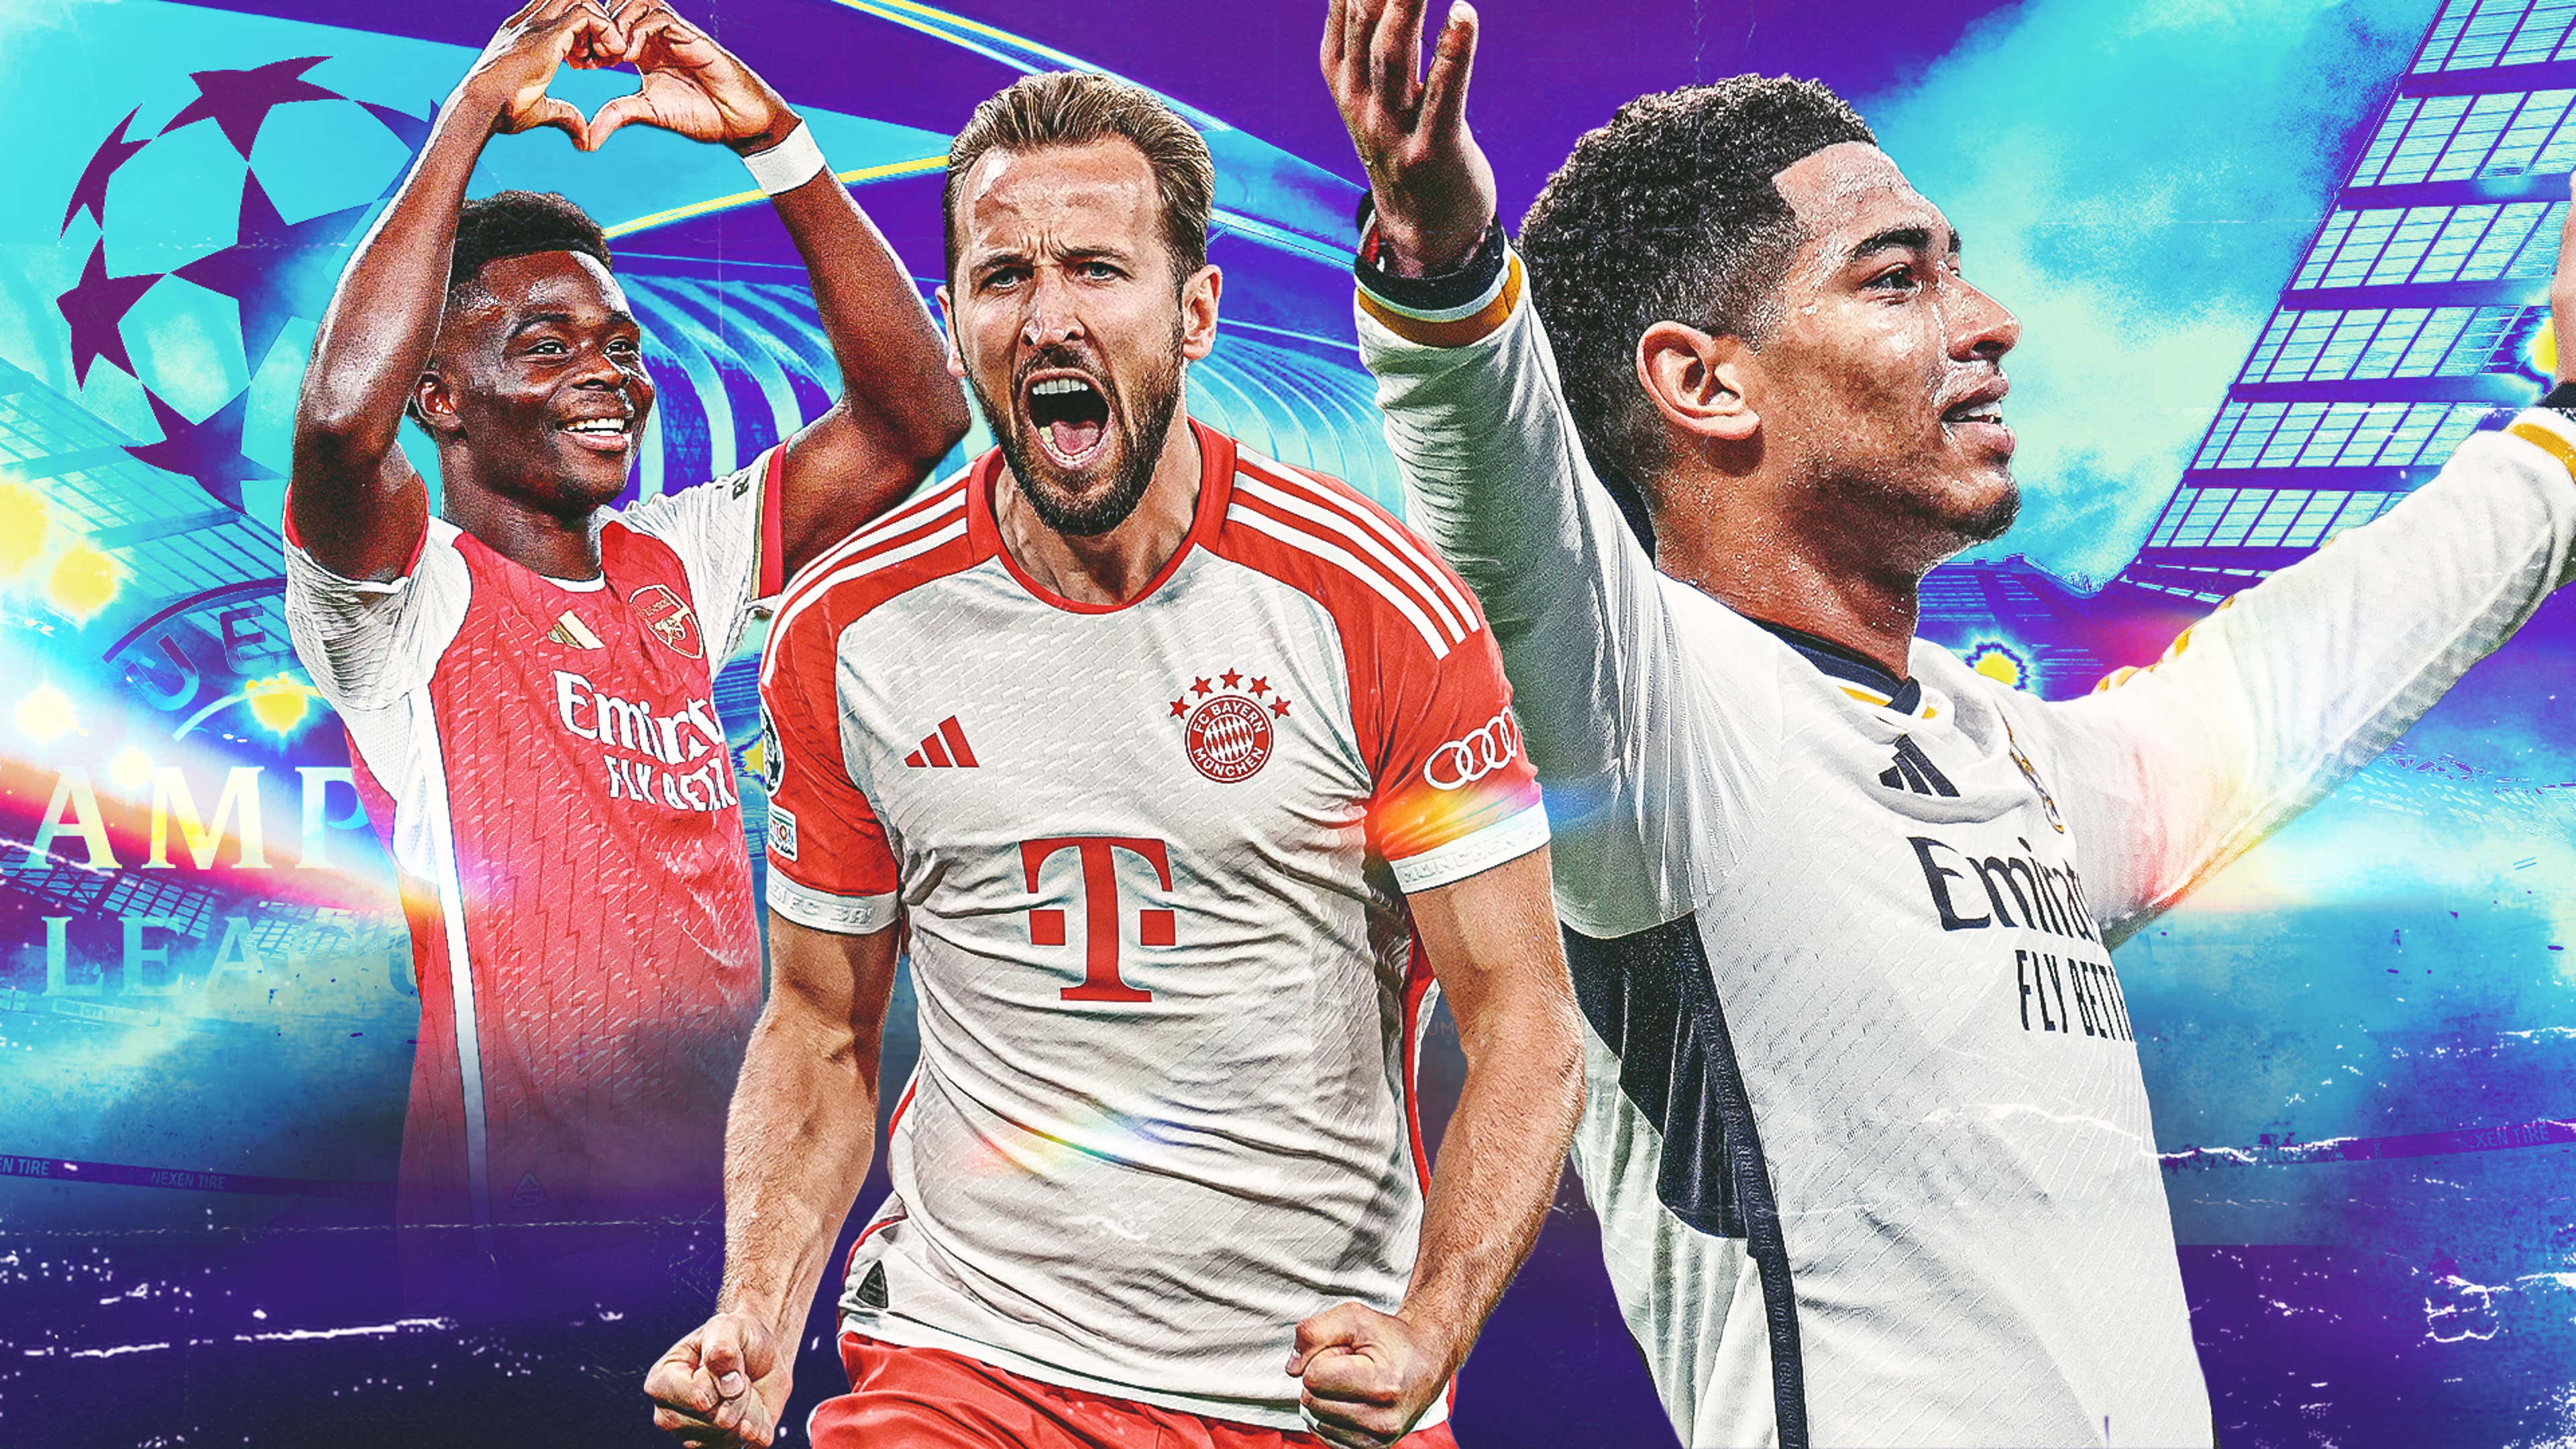 20 New Teams Now Available: How To Get Full Bundesliga, La Liga, Premier  League and Champions League in PES 2017 - Footy Headlines